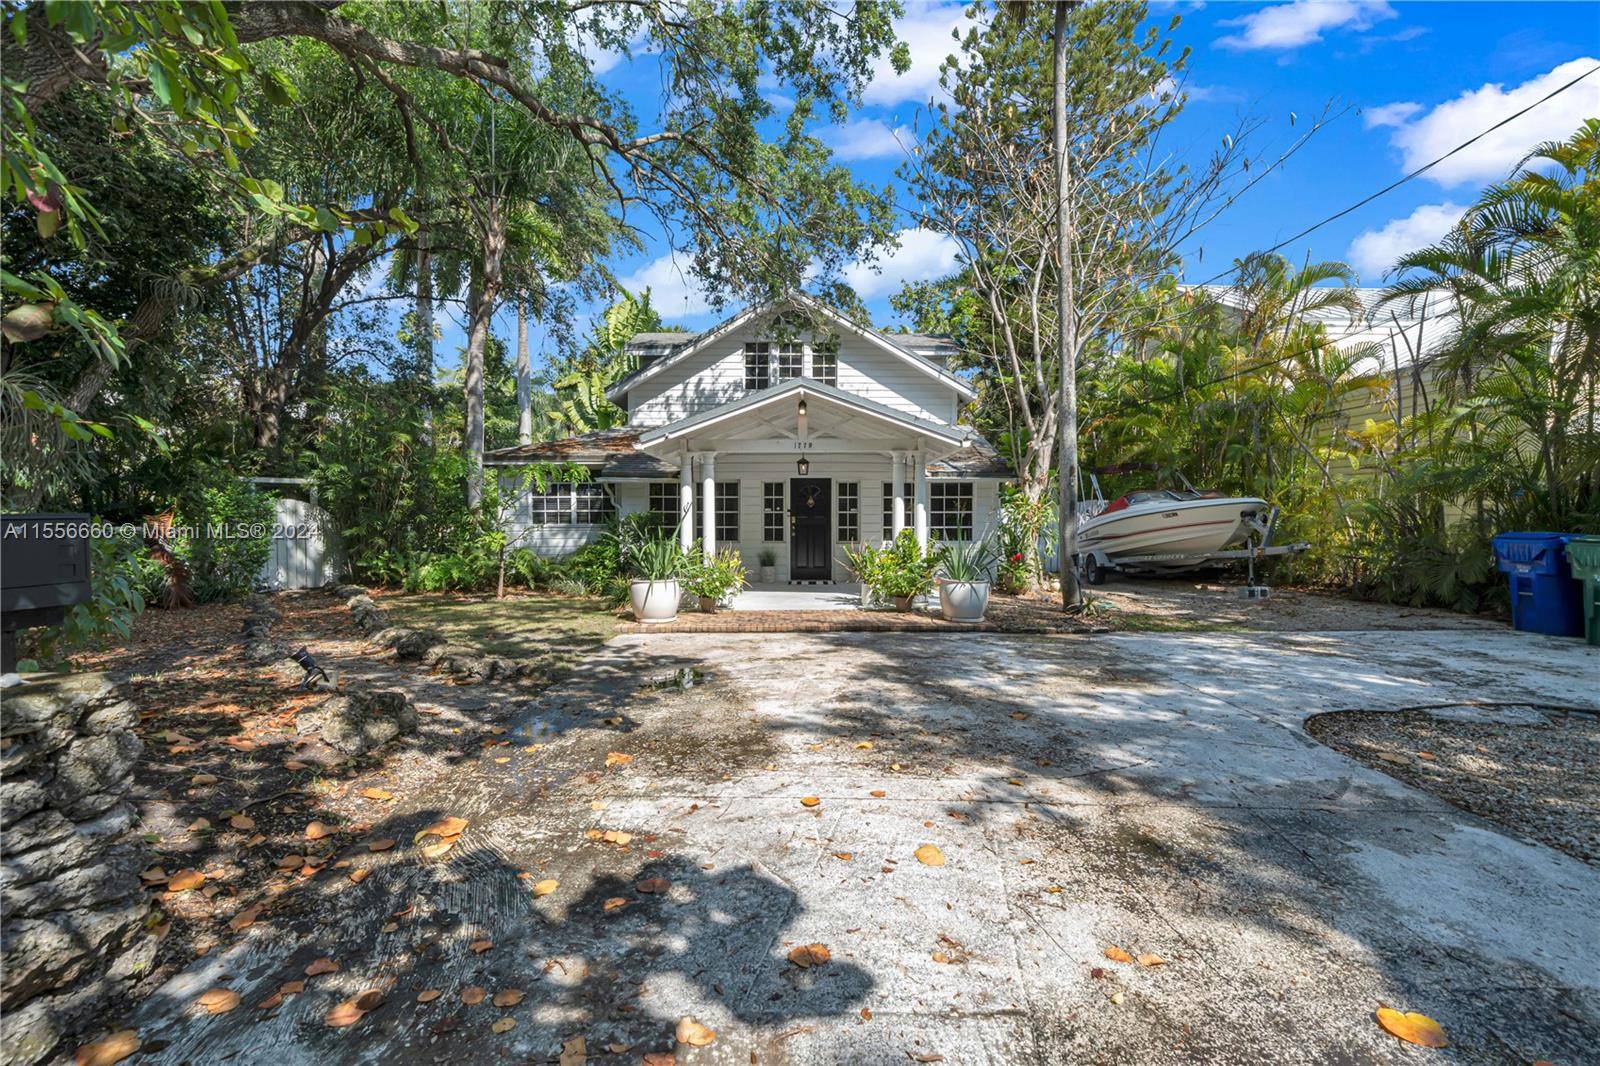 Welcome to this historic 1910 two story home in the serene and sought after neighborhood of North Coconut Grove.